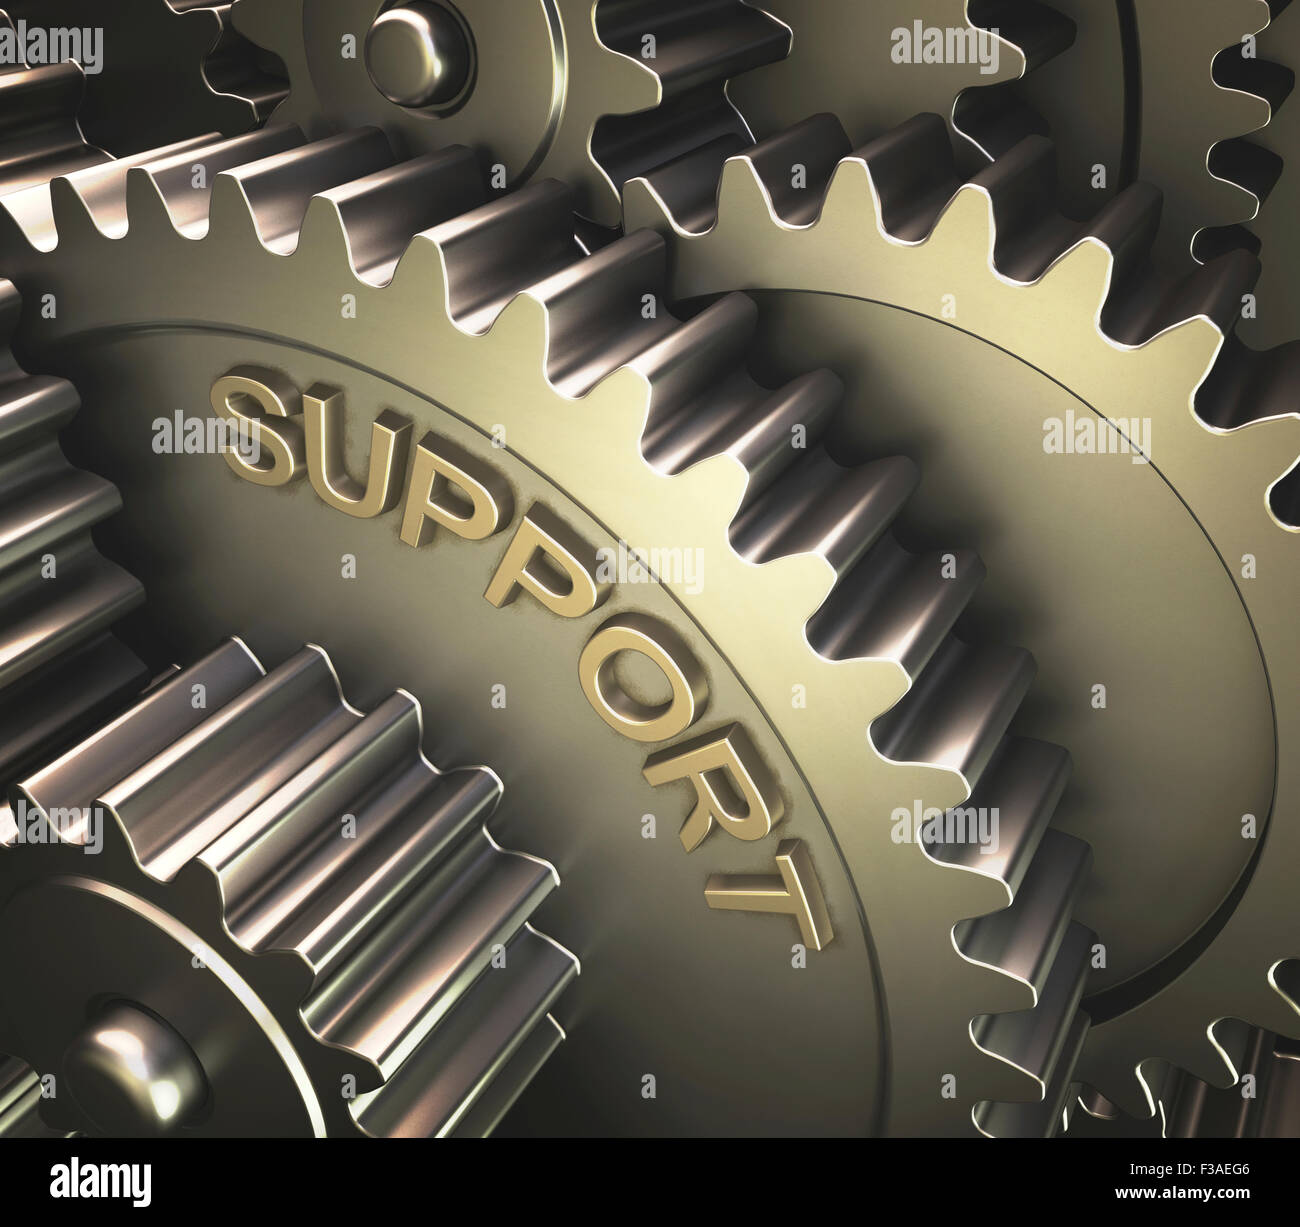 Gears with the word 'support', computer illustration. Stock Photo